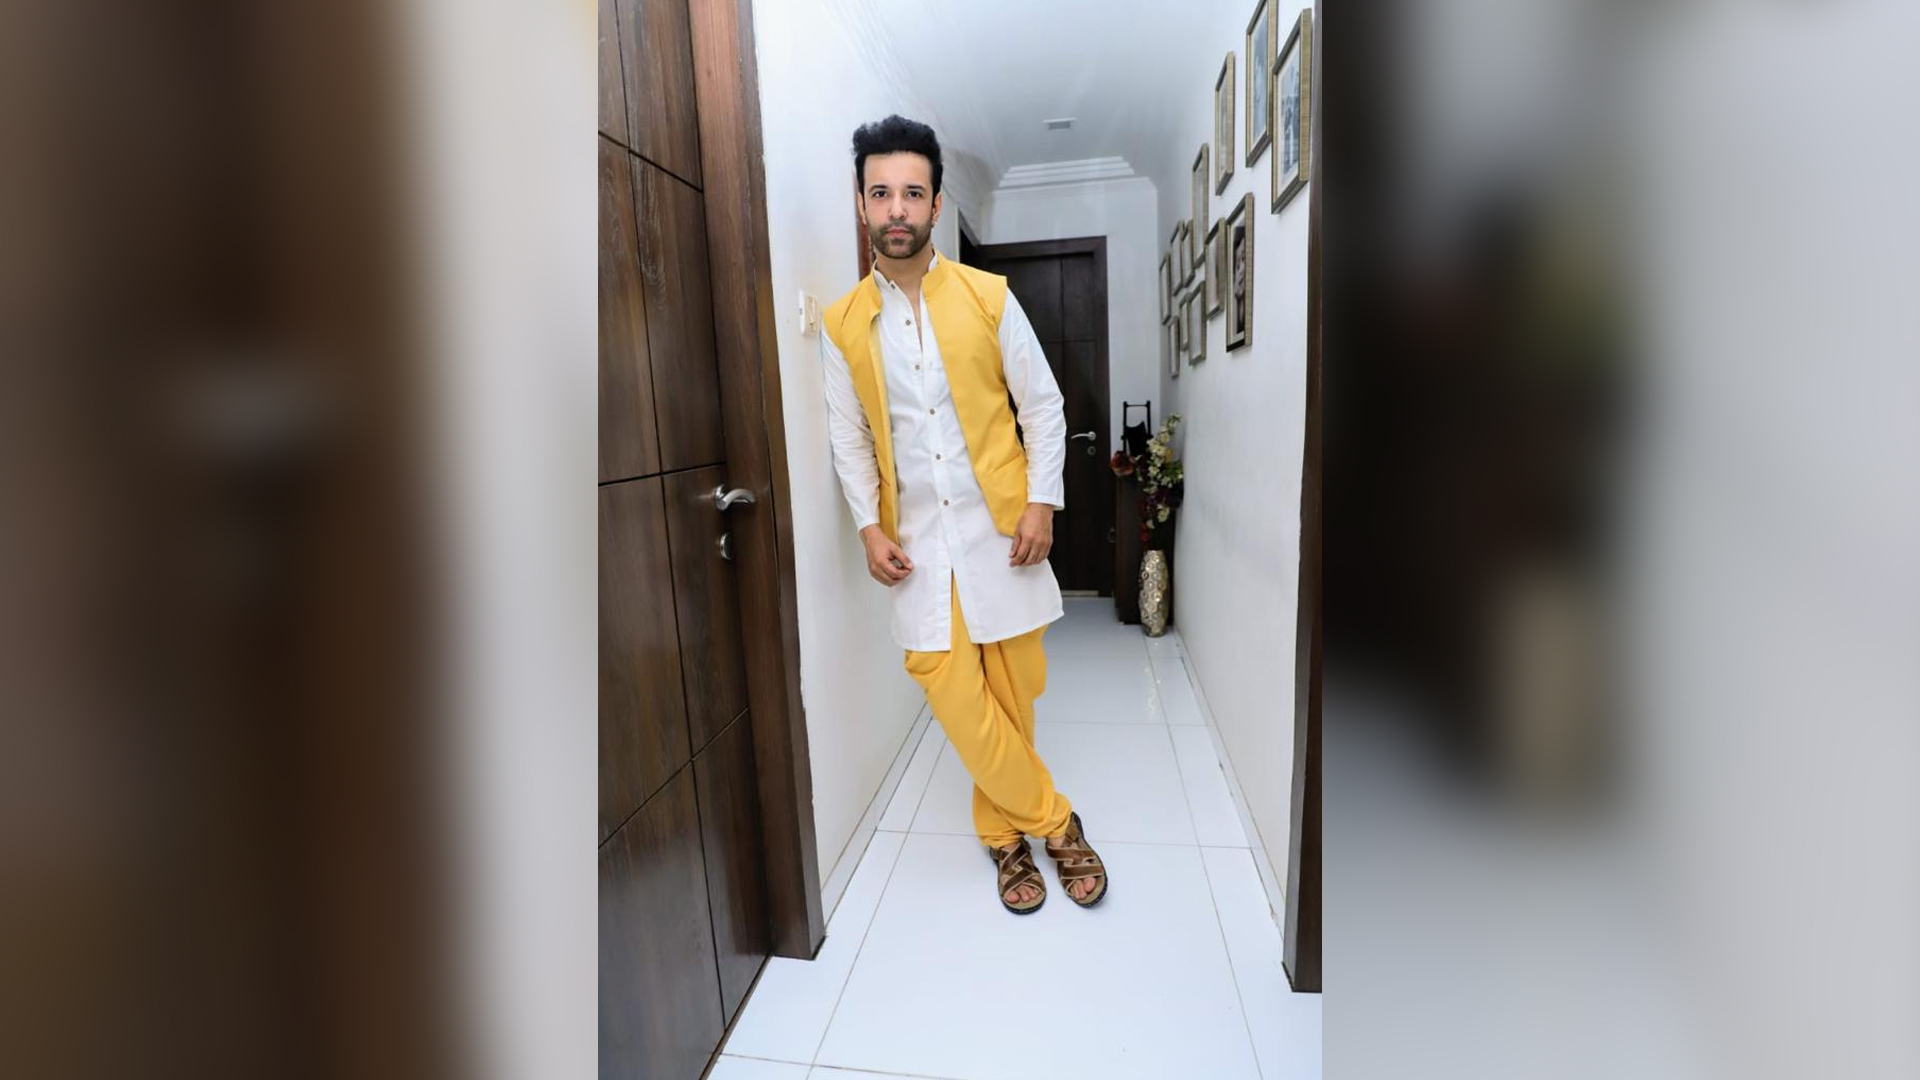 “Navratri is one of the most vibrant, colourful and positive festivals that we get to experience in the year” – Aamir Ali